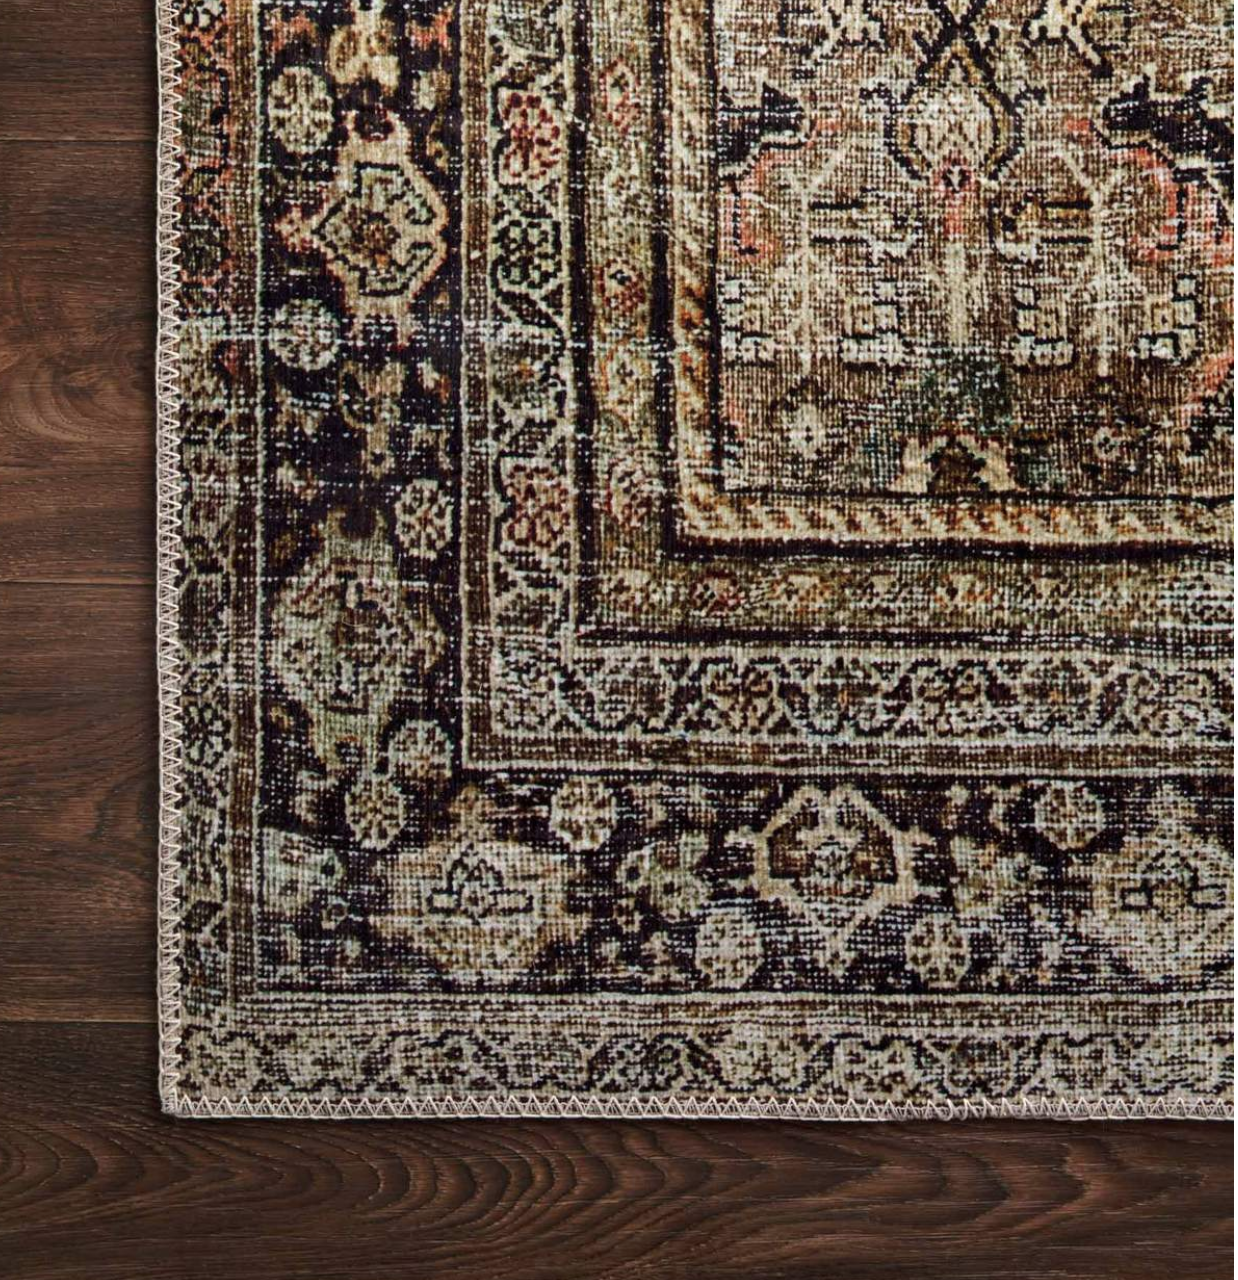 CC and Mike Guide to Buying the Perfect Area Rug